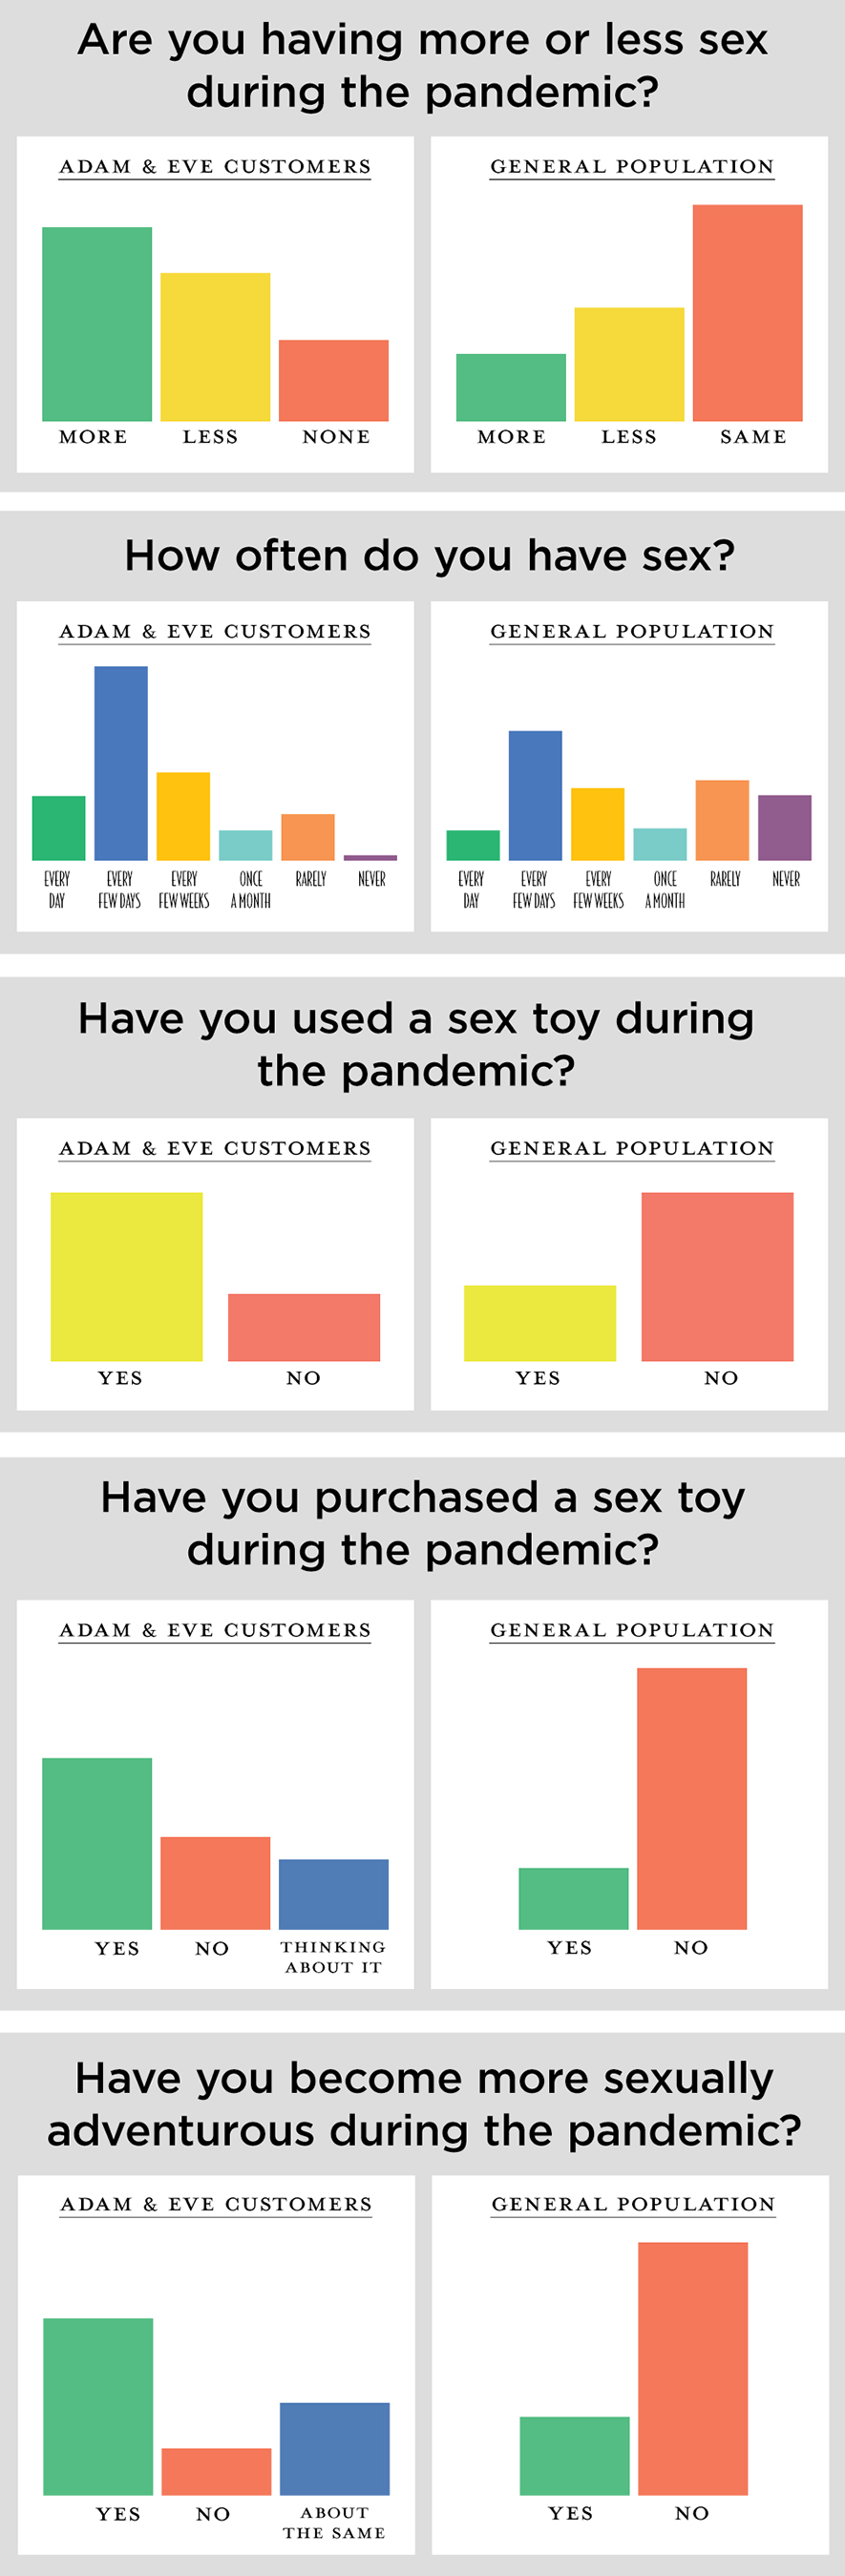 Adam & Eve Compares Sex Habits of Customers to General Population